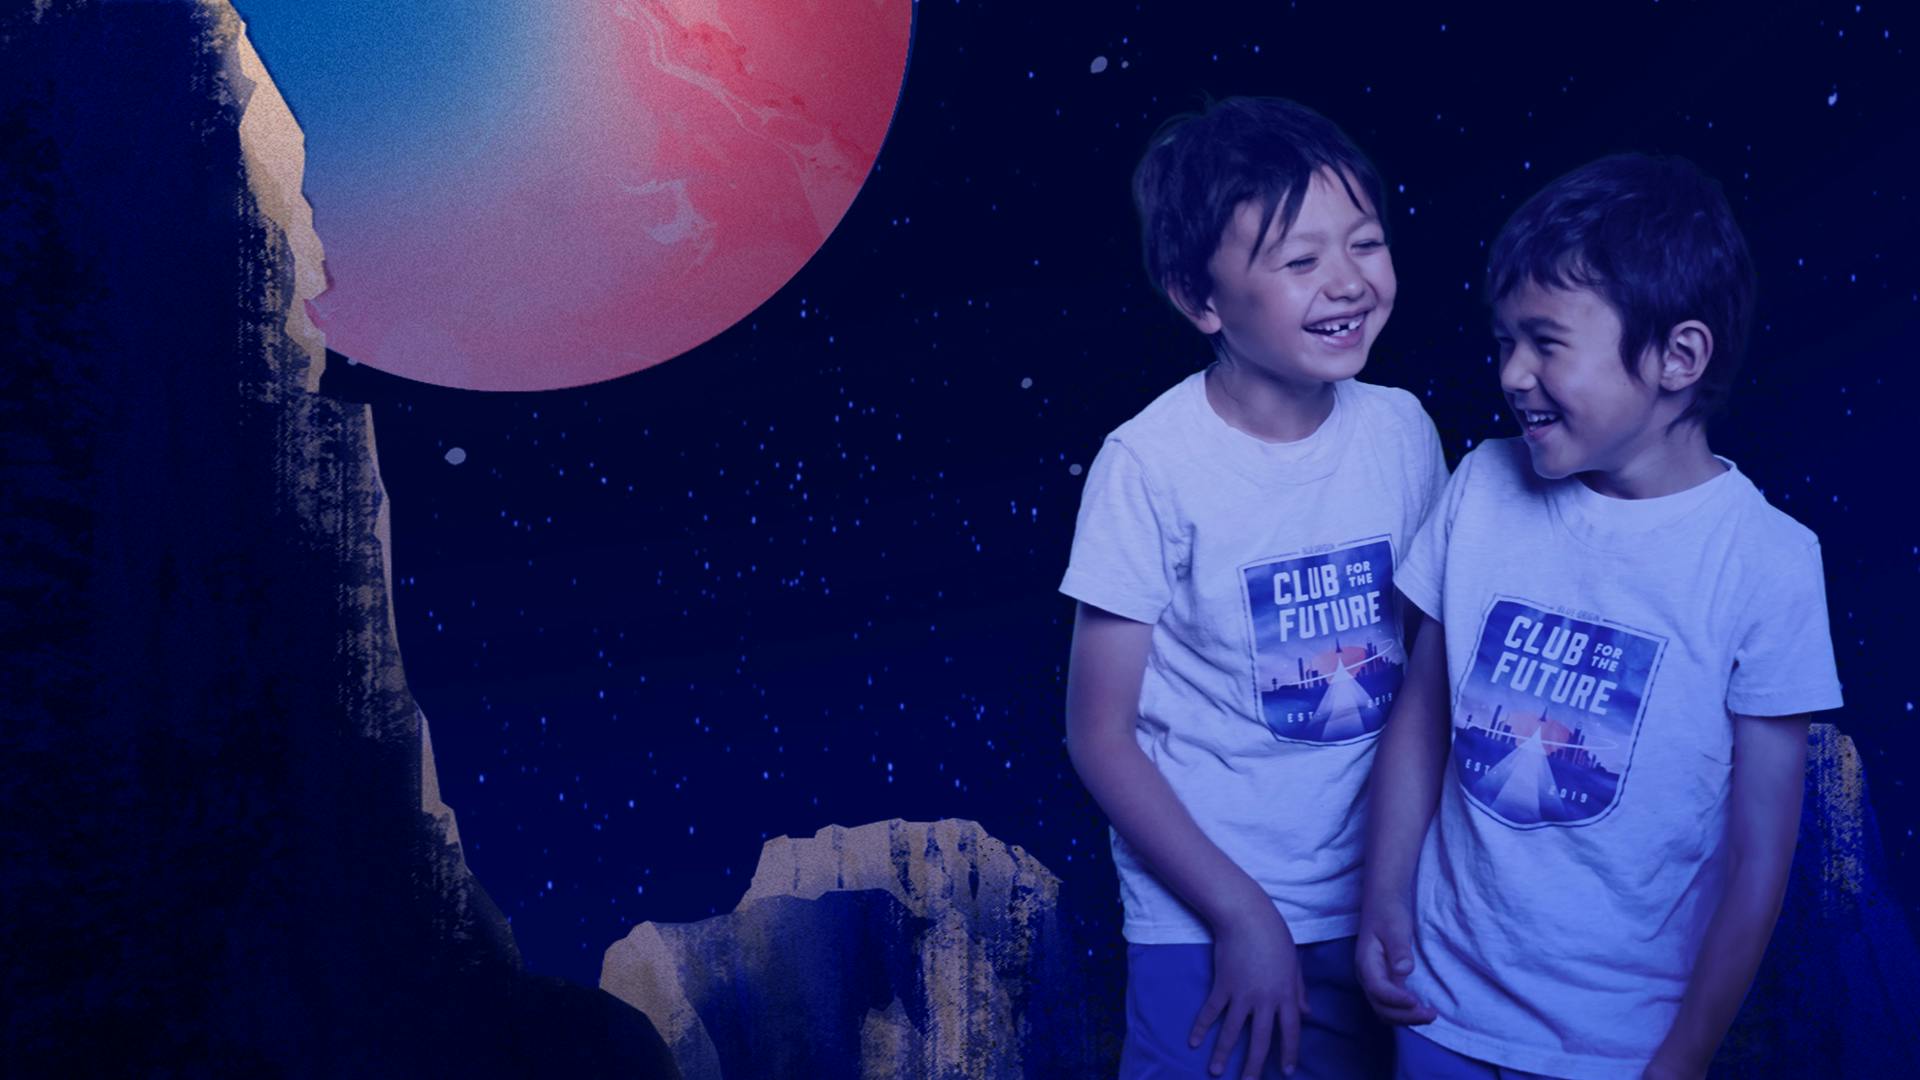 Two young kids laugh together, wearing 'Club for the Future' T-shirts